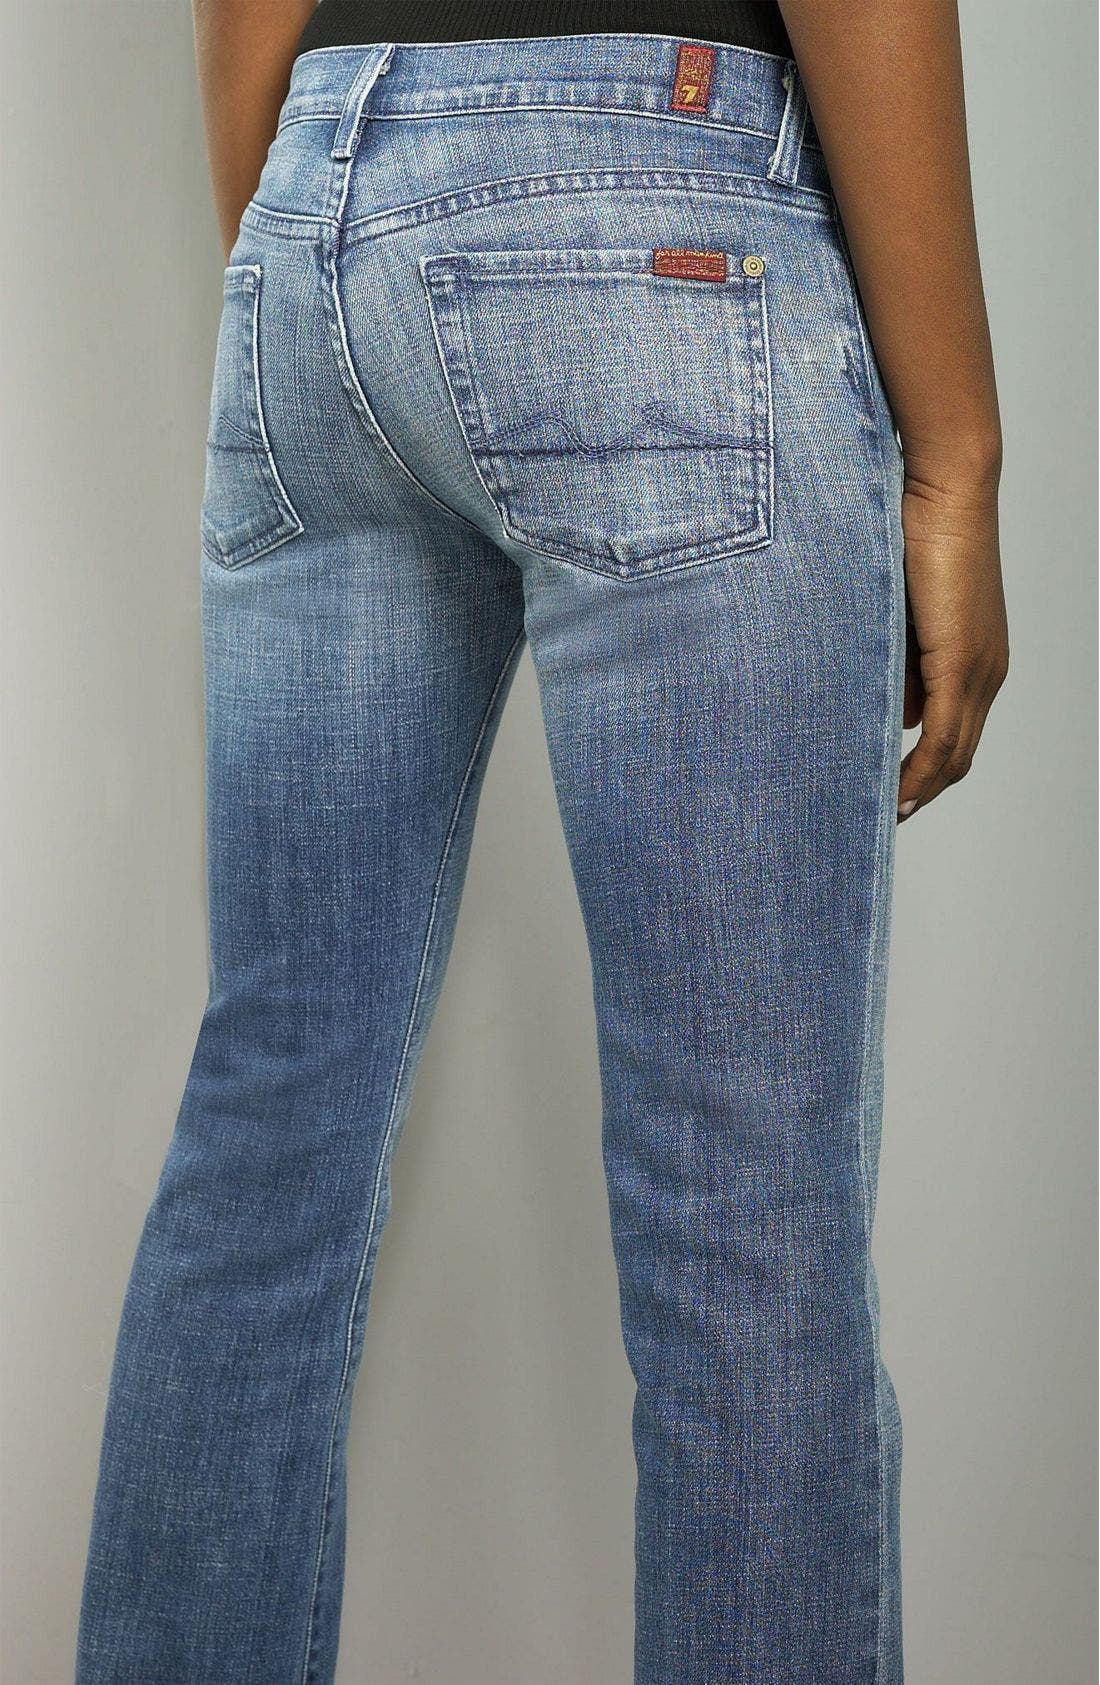 7 for all mankind boy cut jeans